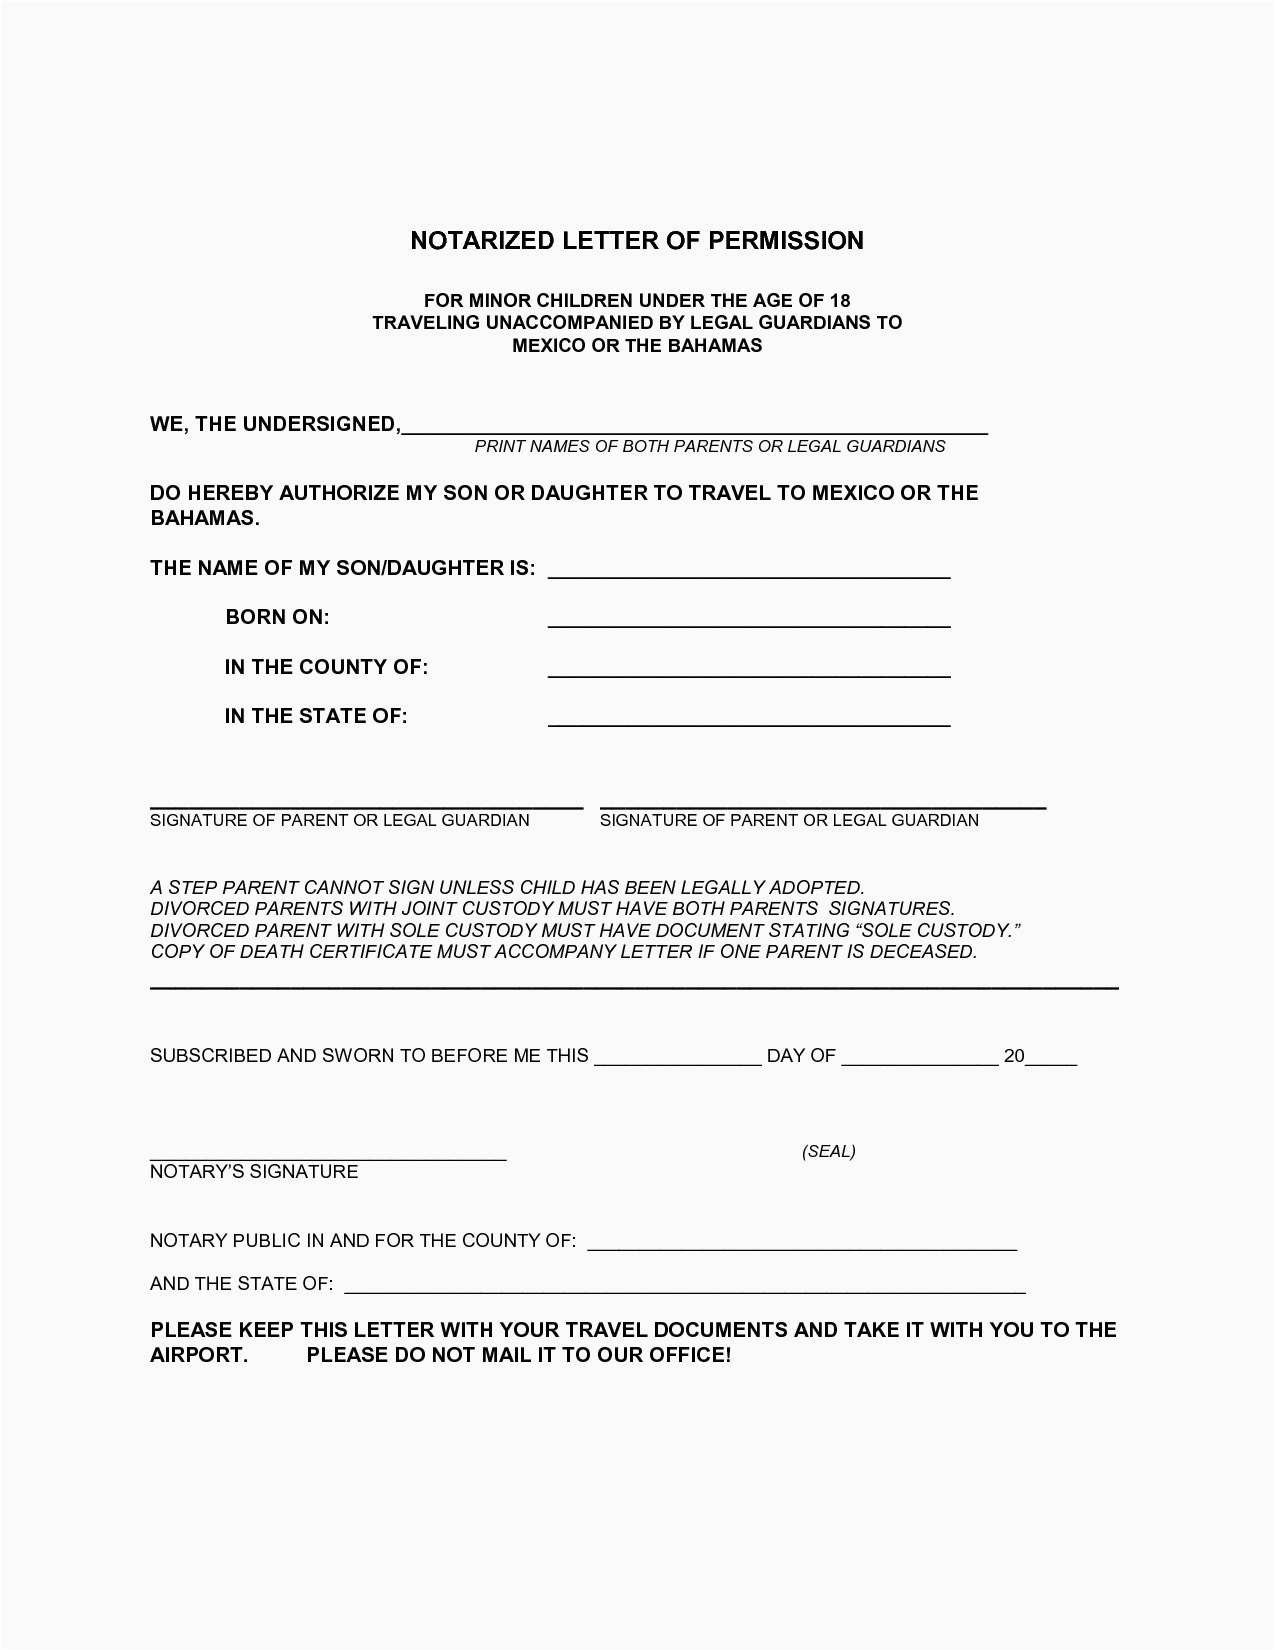 Sample Notarized Letter For Travel With Child  Myvacationplan within Notarized Letter Template For Child Travel